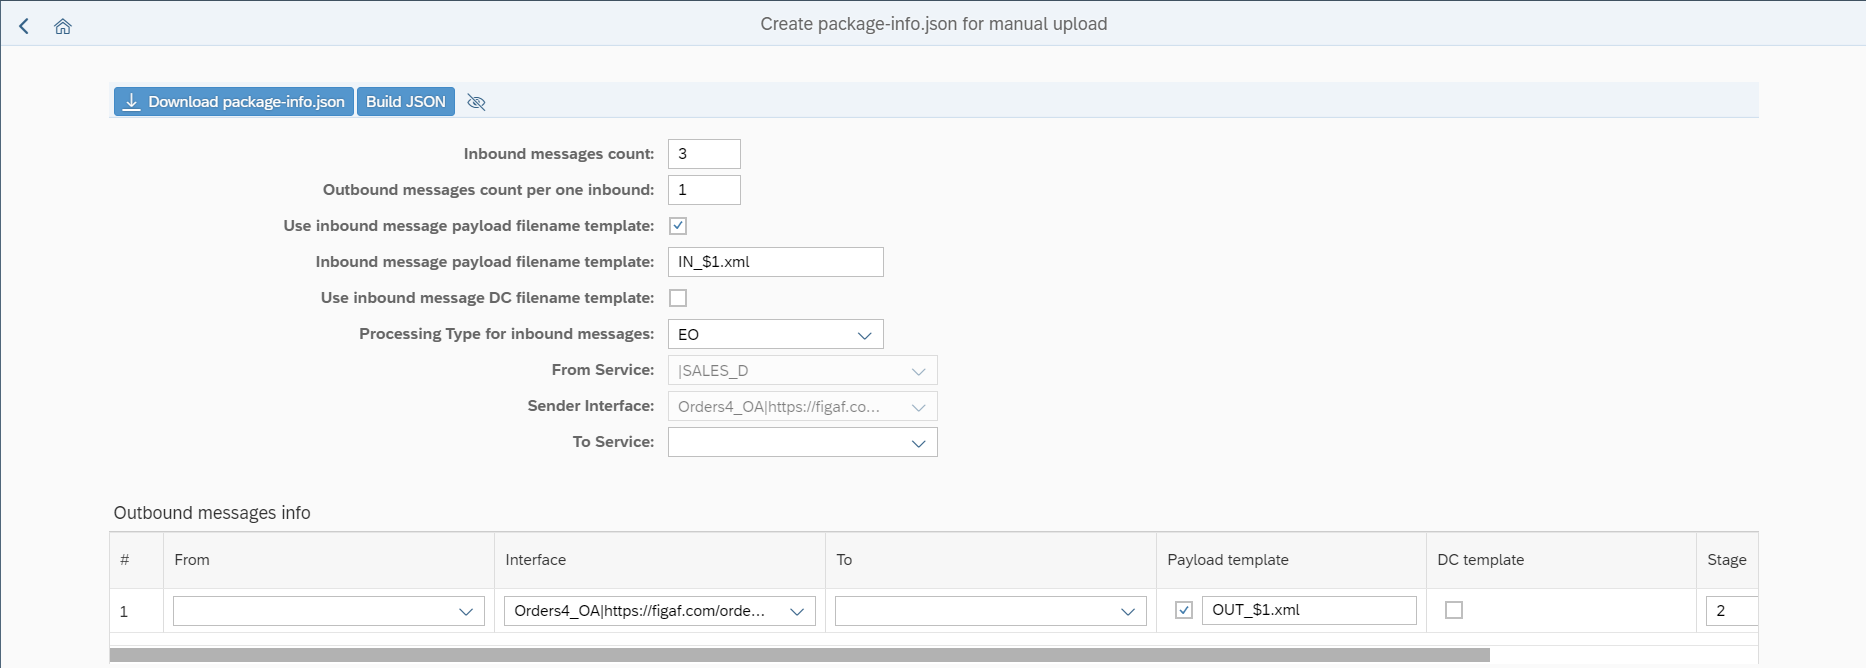 example create package info json for manual upload page